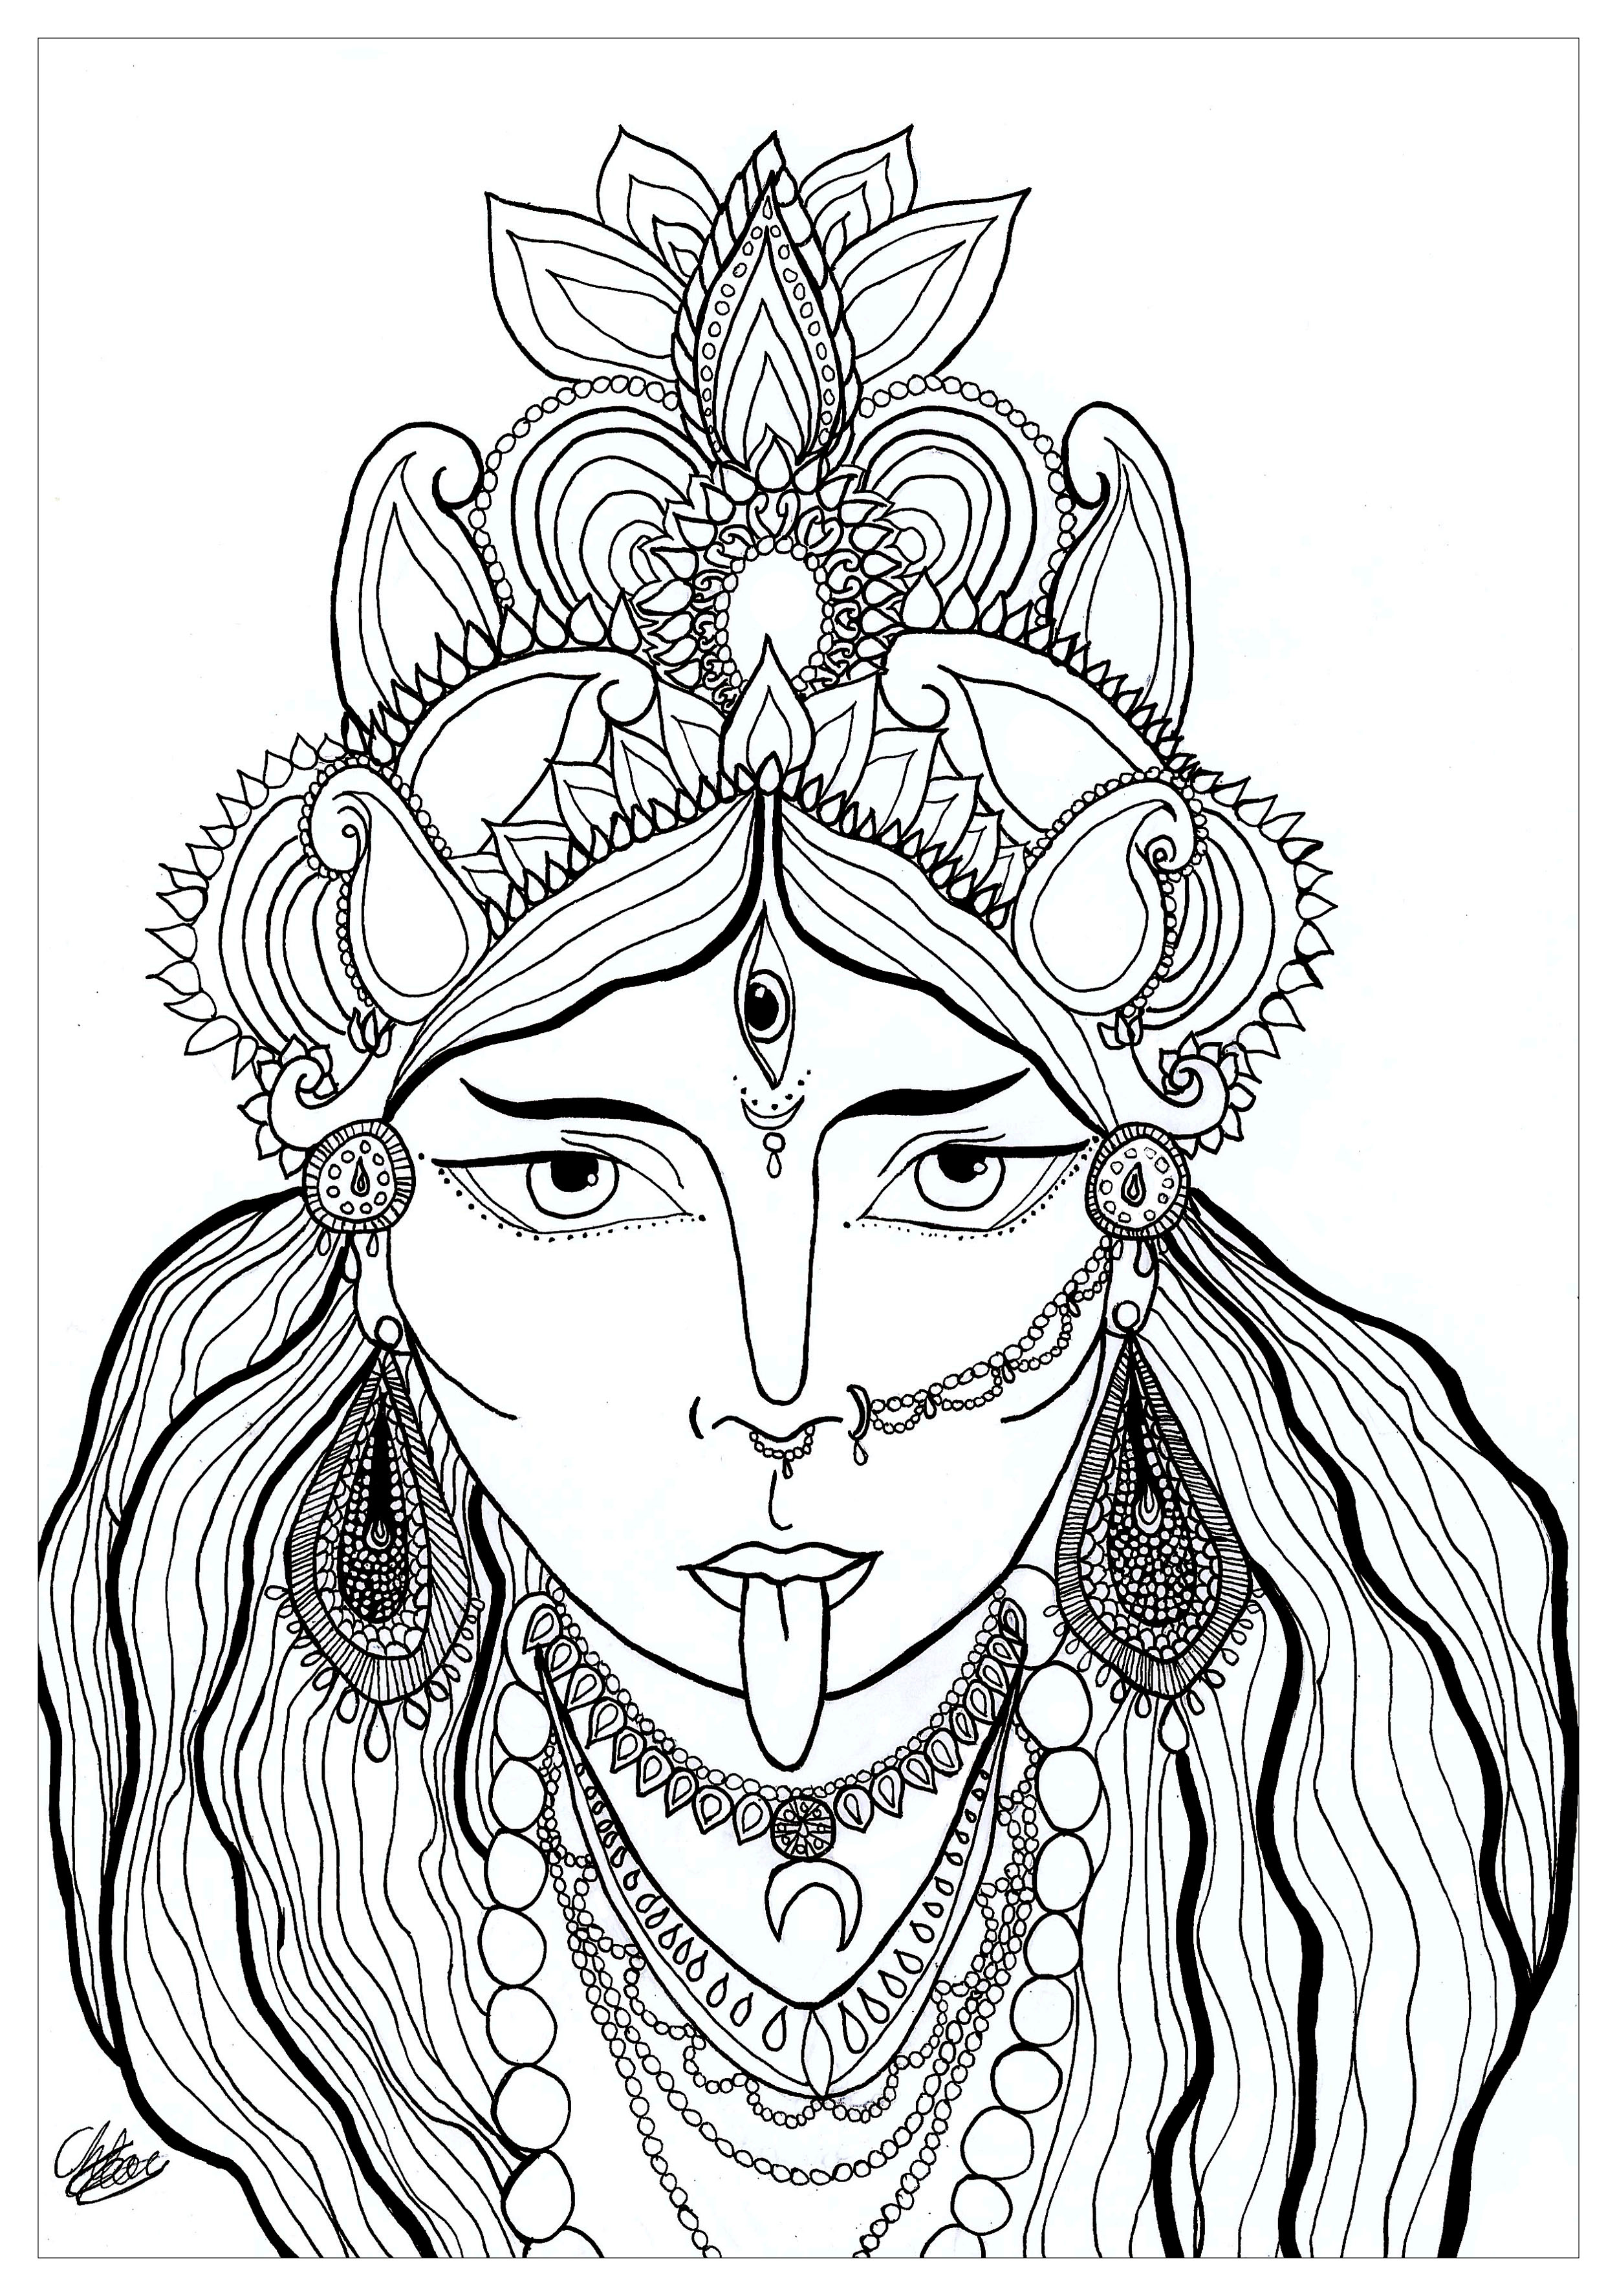 Coloring page of the goddess Kali who comes from the Hindu religion. She is the goddess of preservation, transformation and destruction. Kali is also called the black goddess, Artist : Chloe